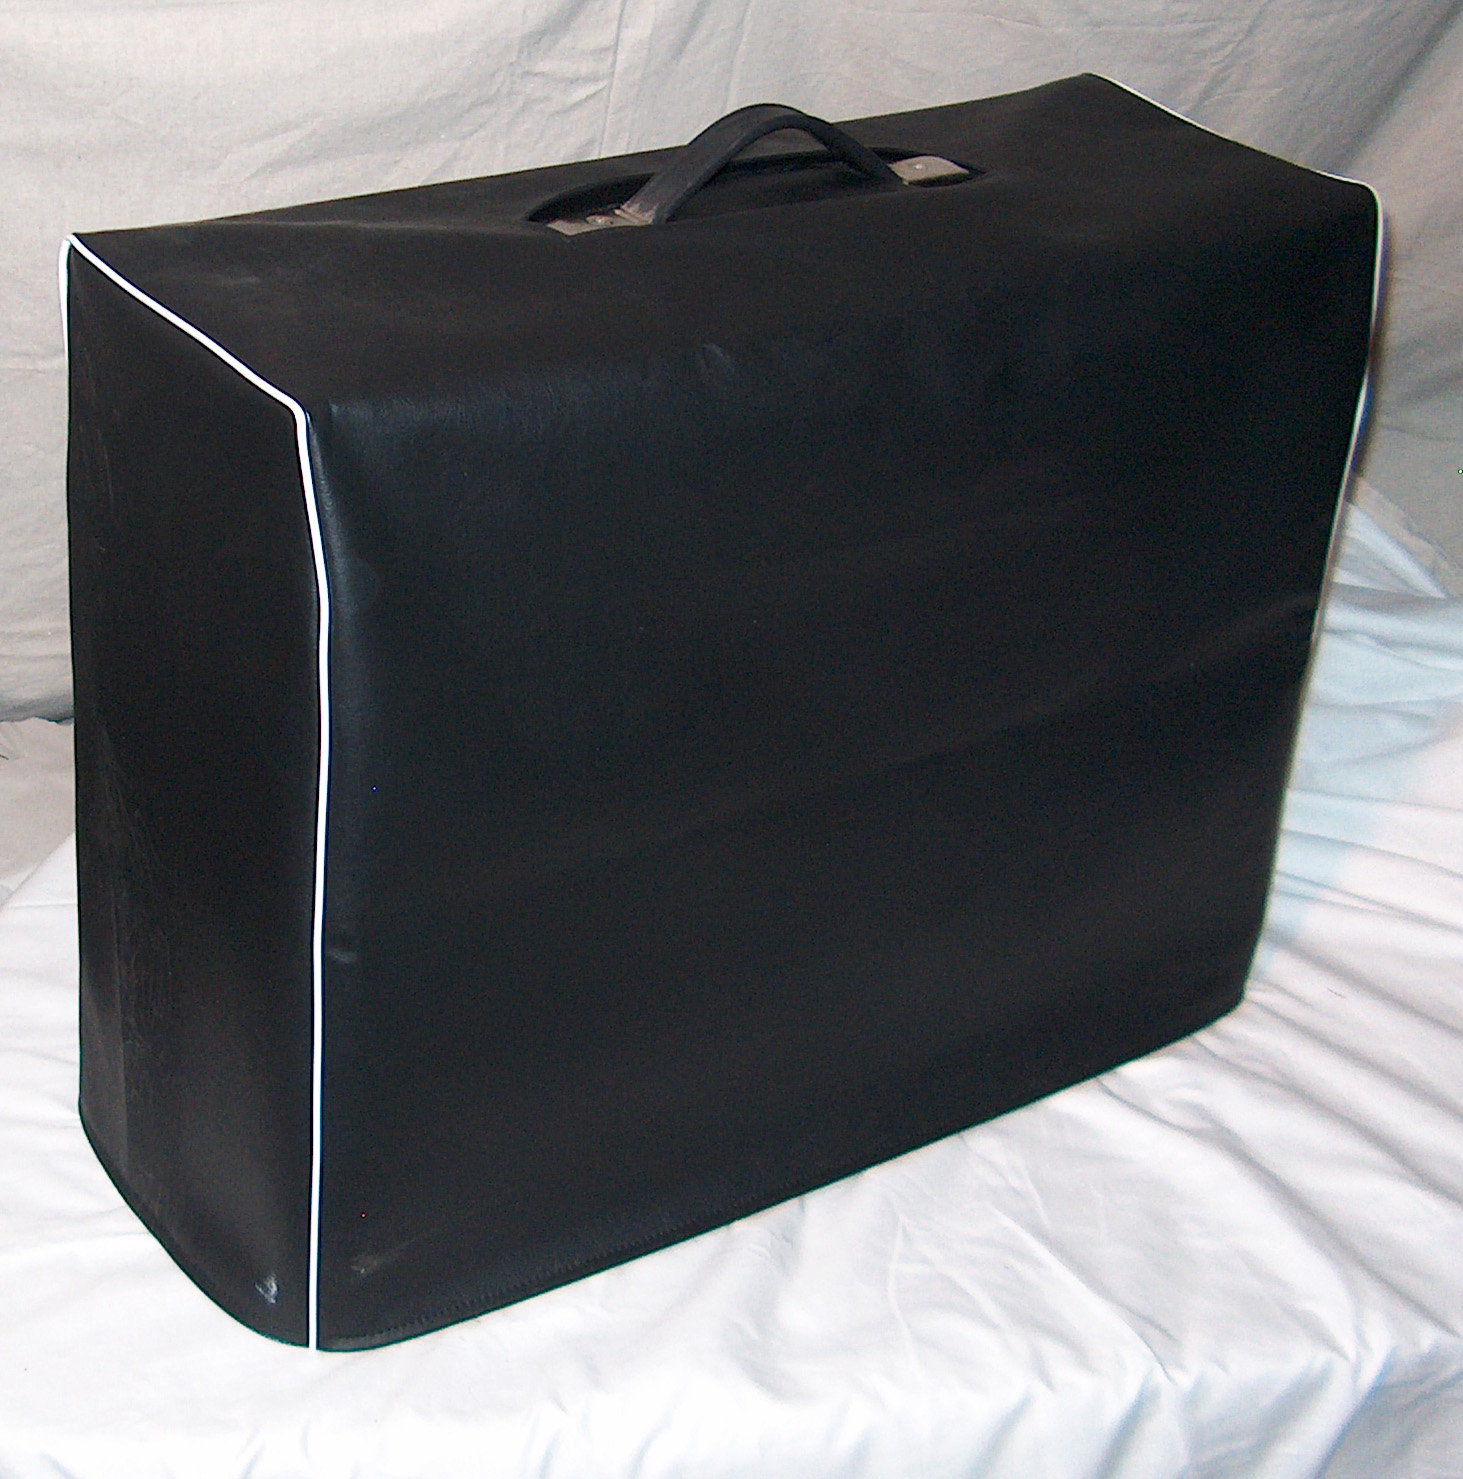 Example of black vinyl cover with piping